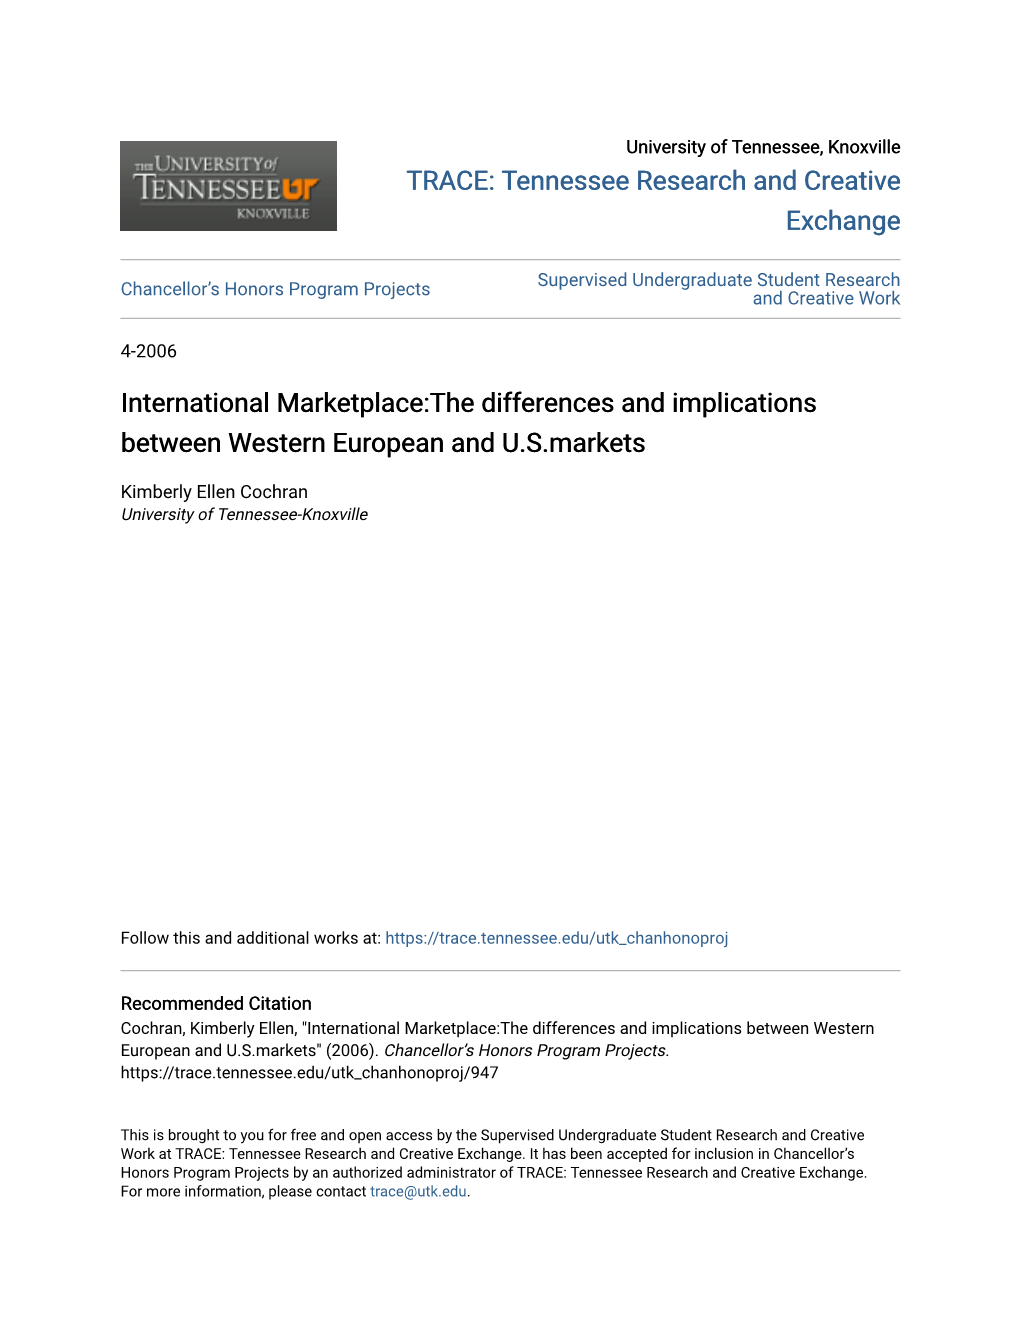 International Marketplace:The Differences and Implications Between Western European and U.S.Markets